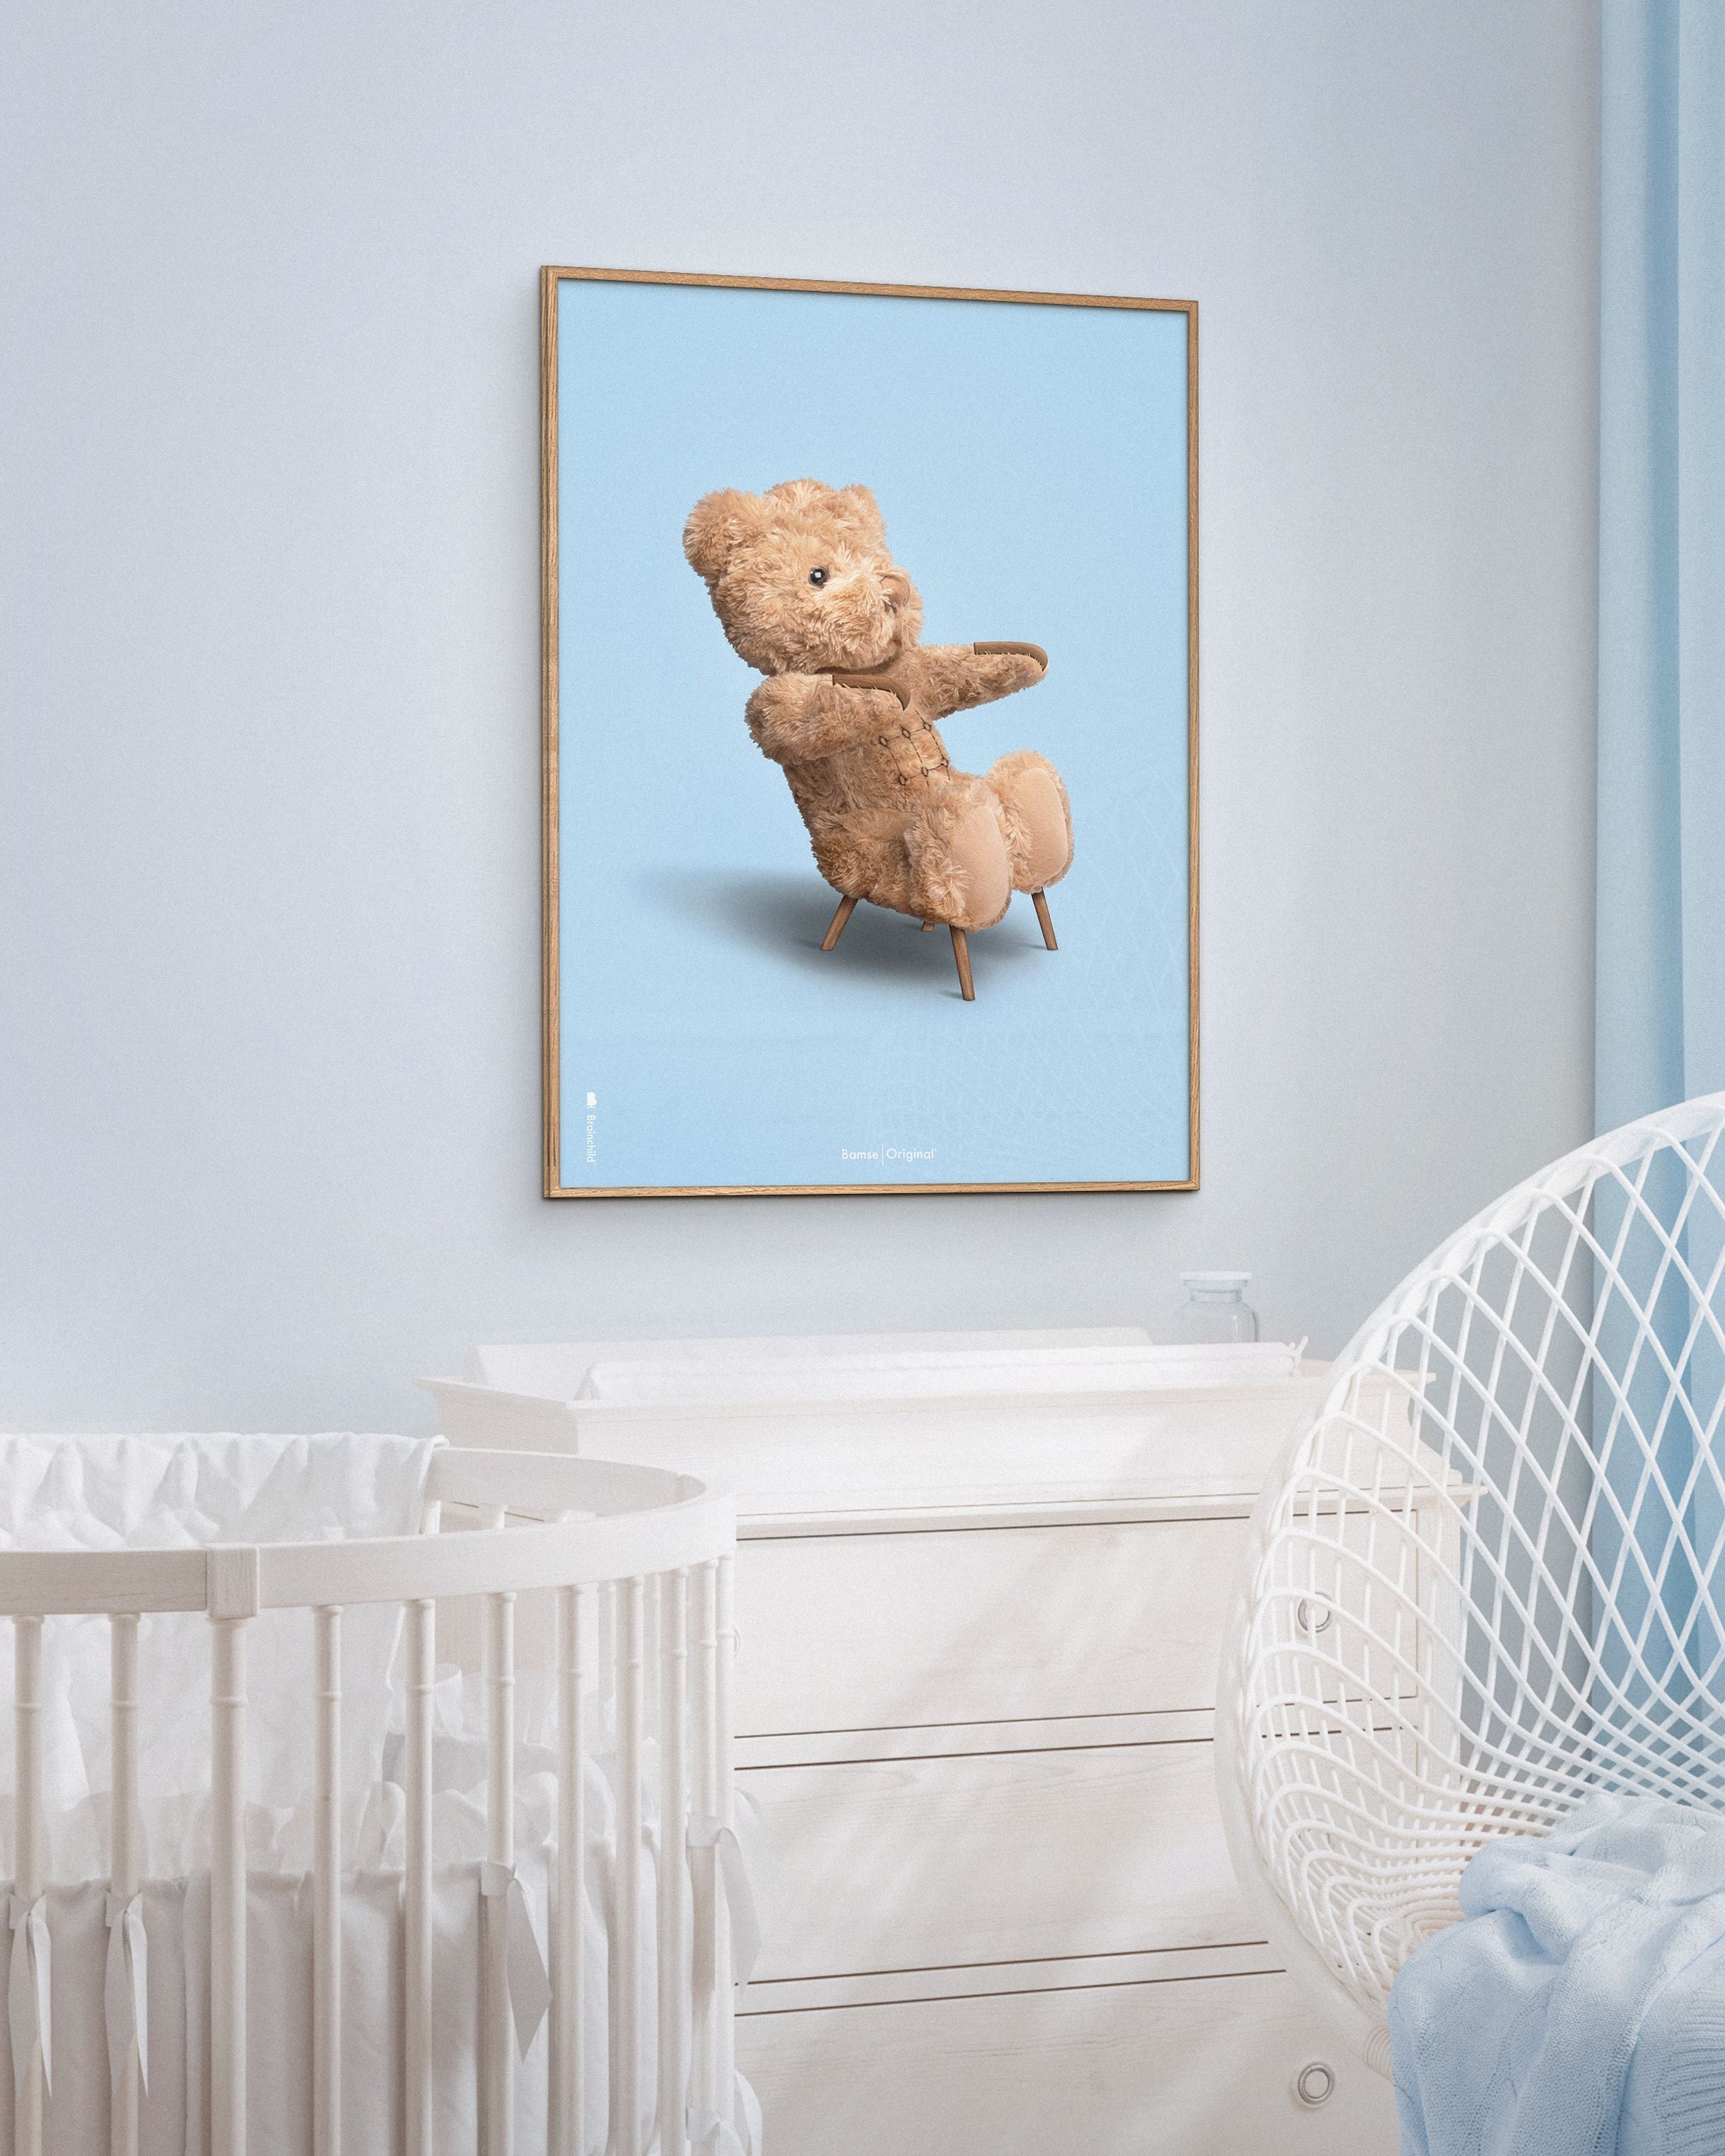 Brainchild Teddy Bear Classic Poster Without Frame 30x40 Cm, Light Blue Background